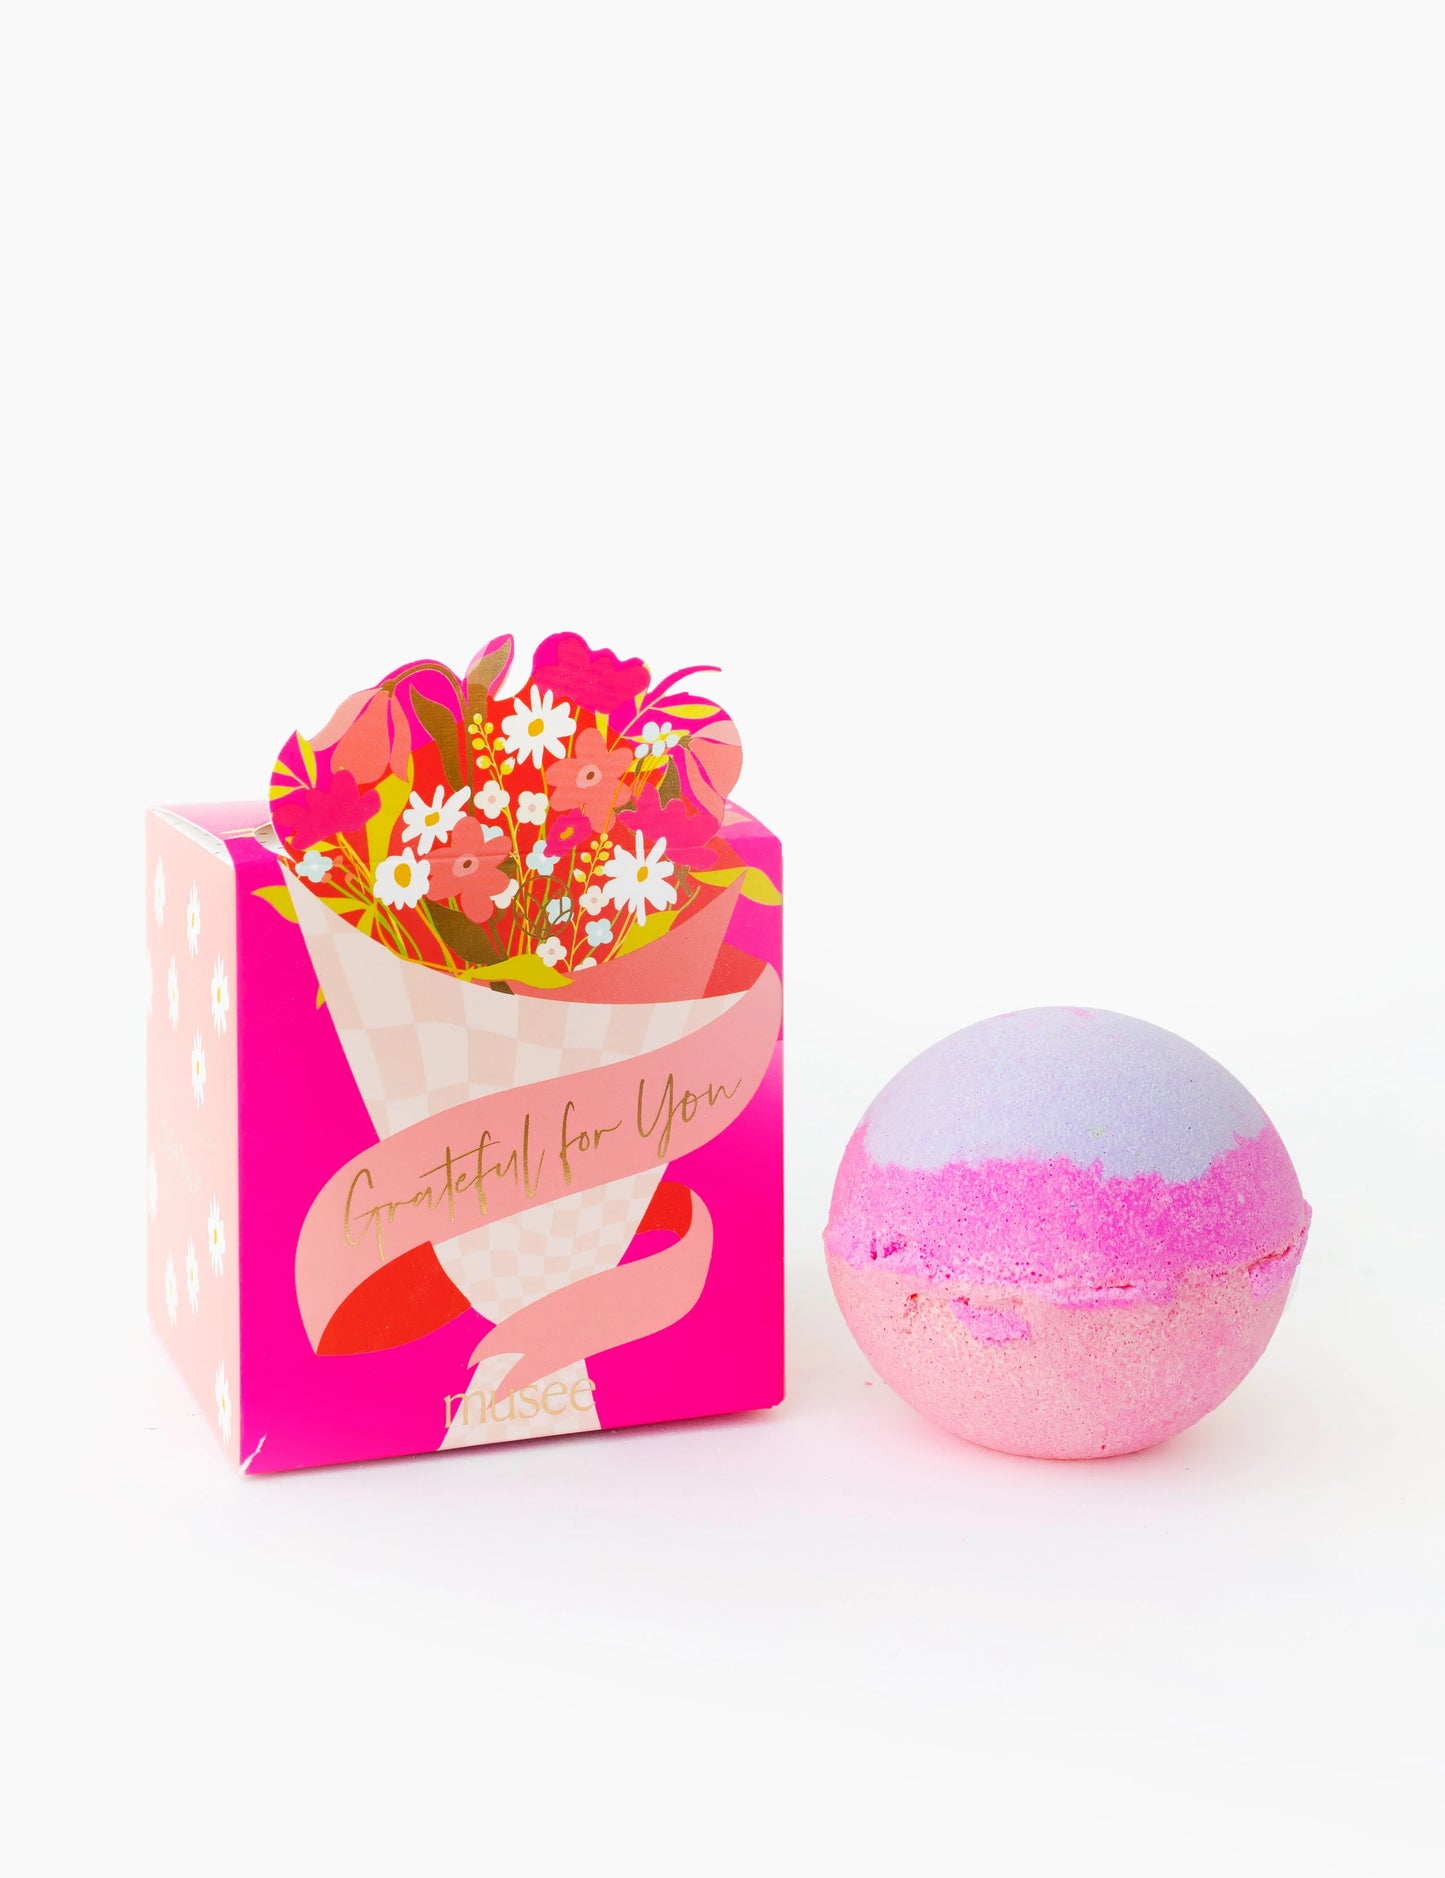 Boxed Bath Bomb: Grateful for You